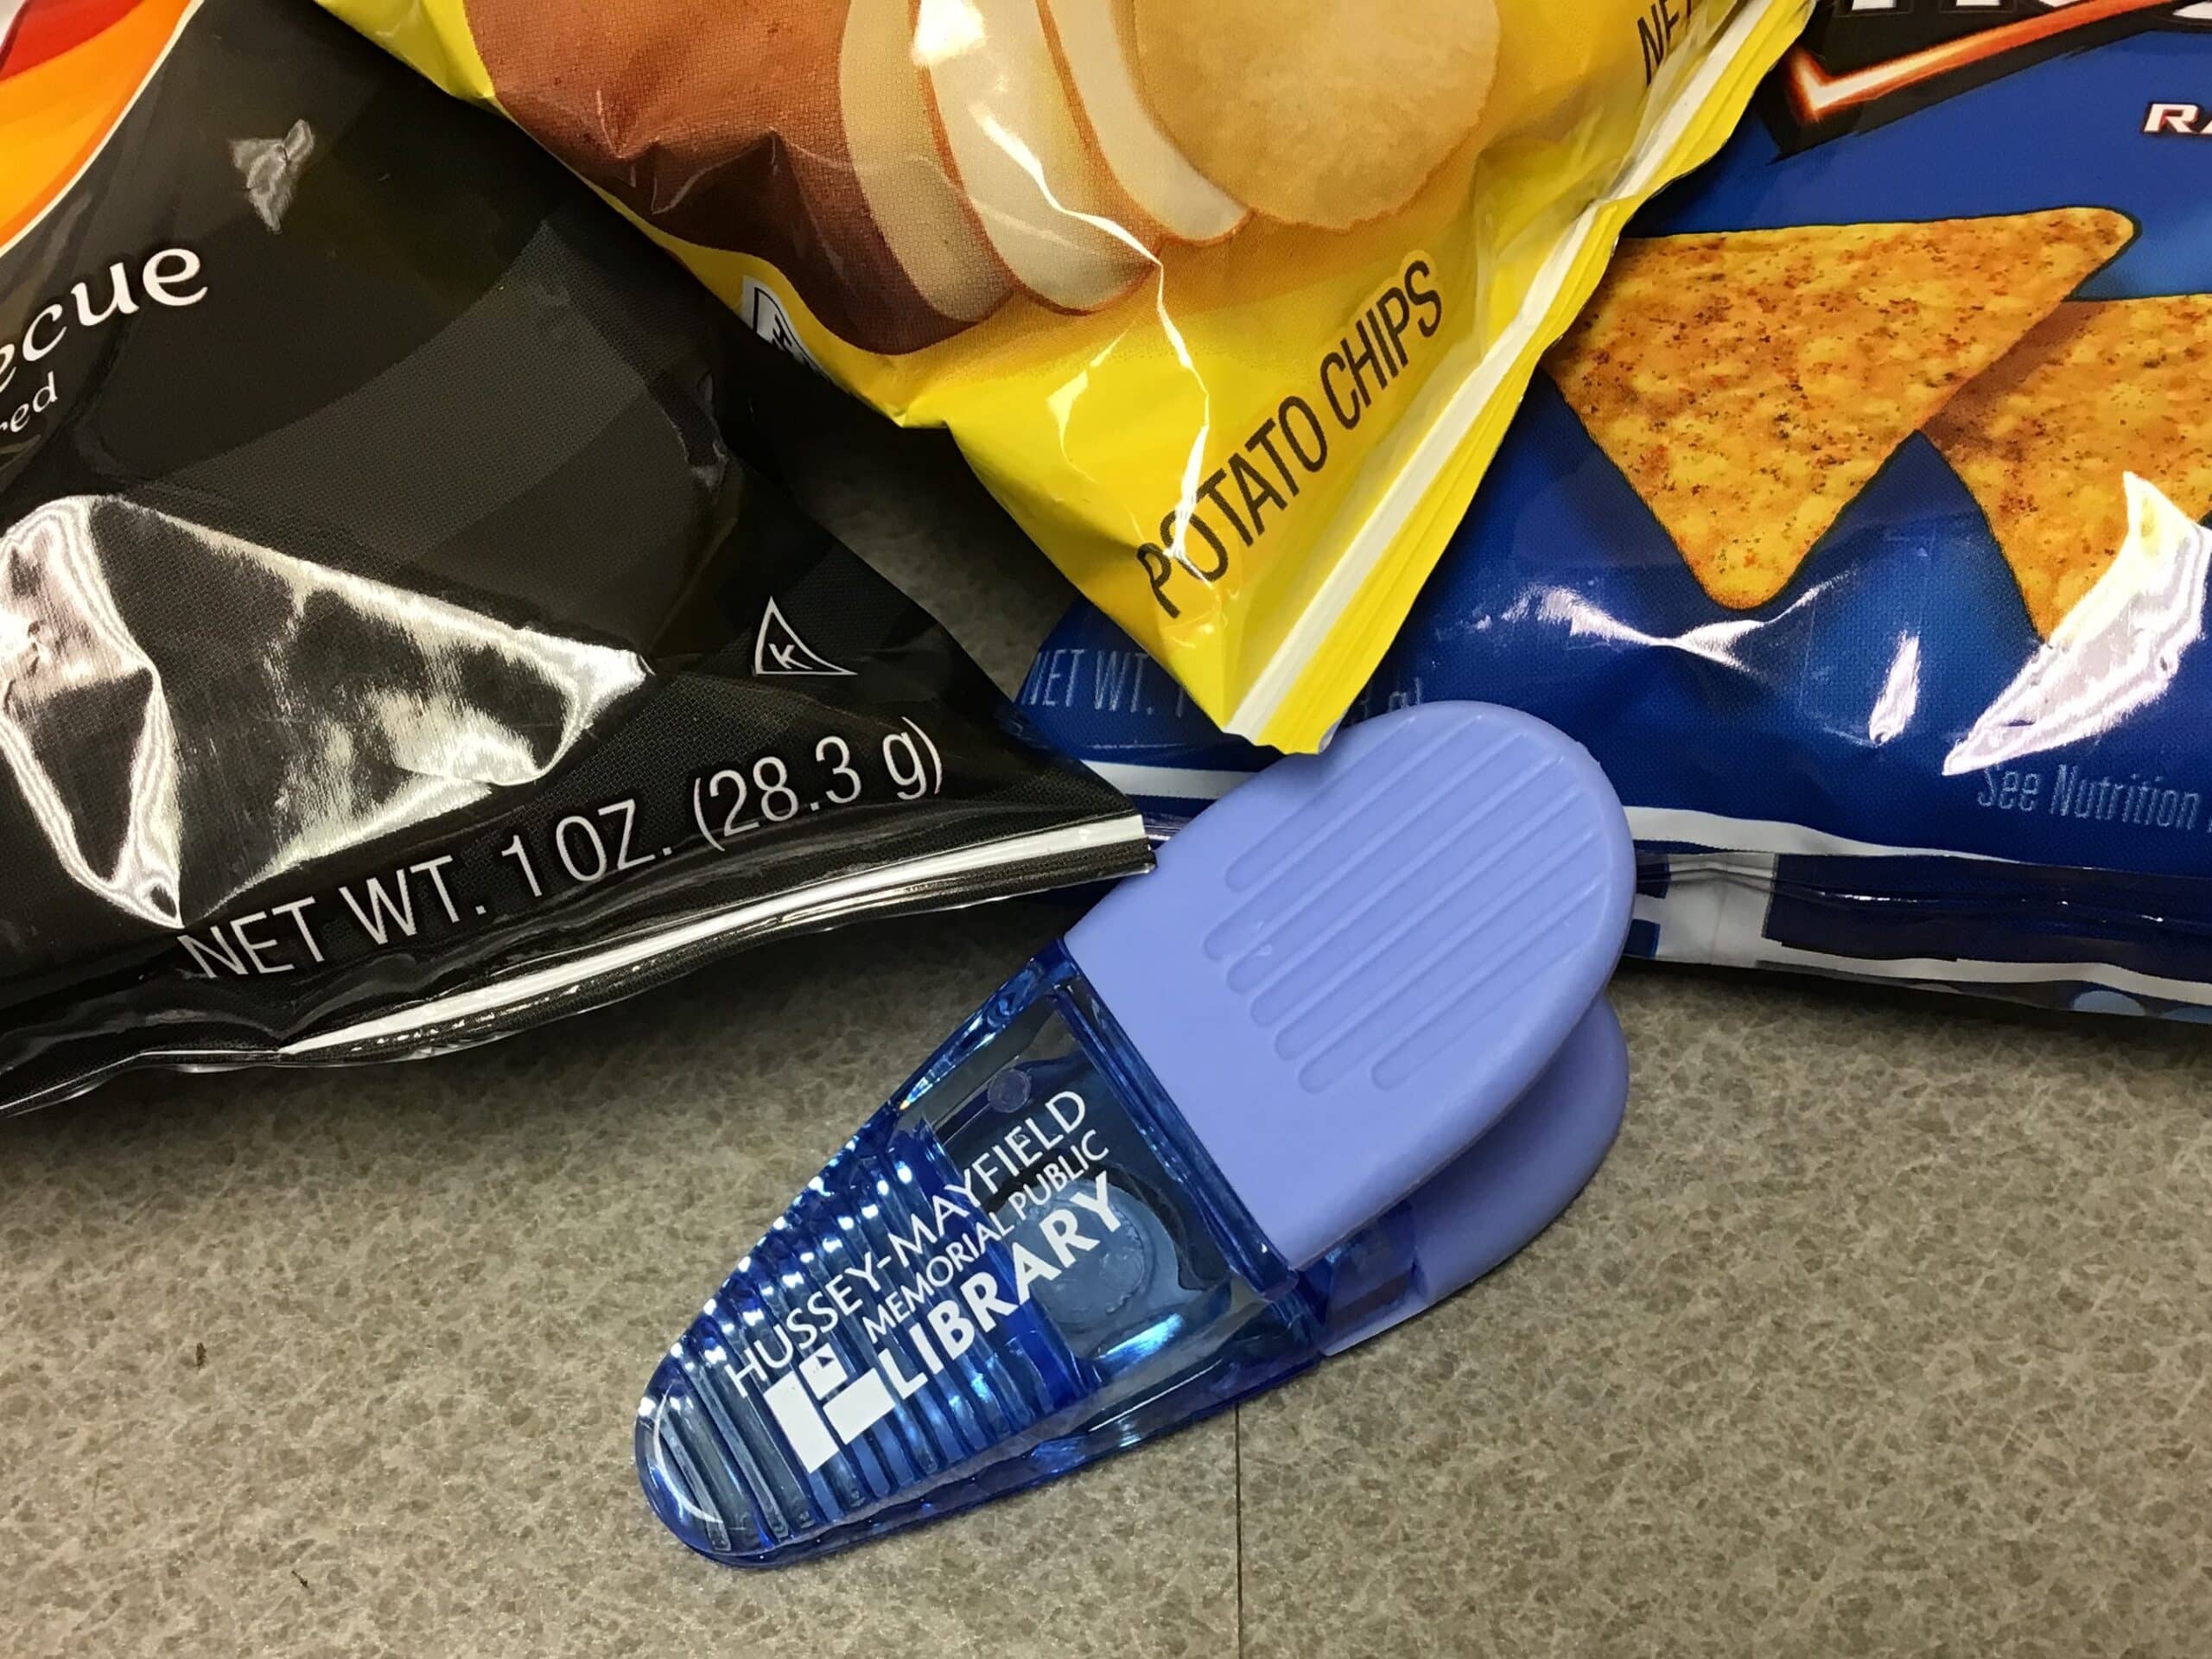 chip clip with bags of chips